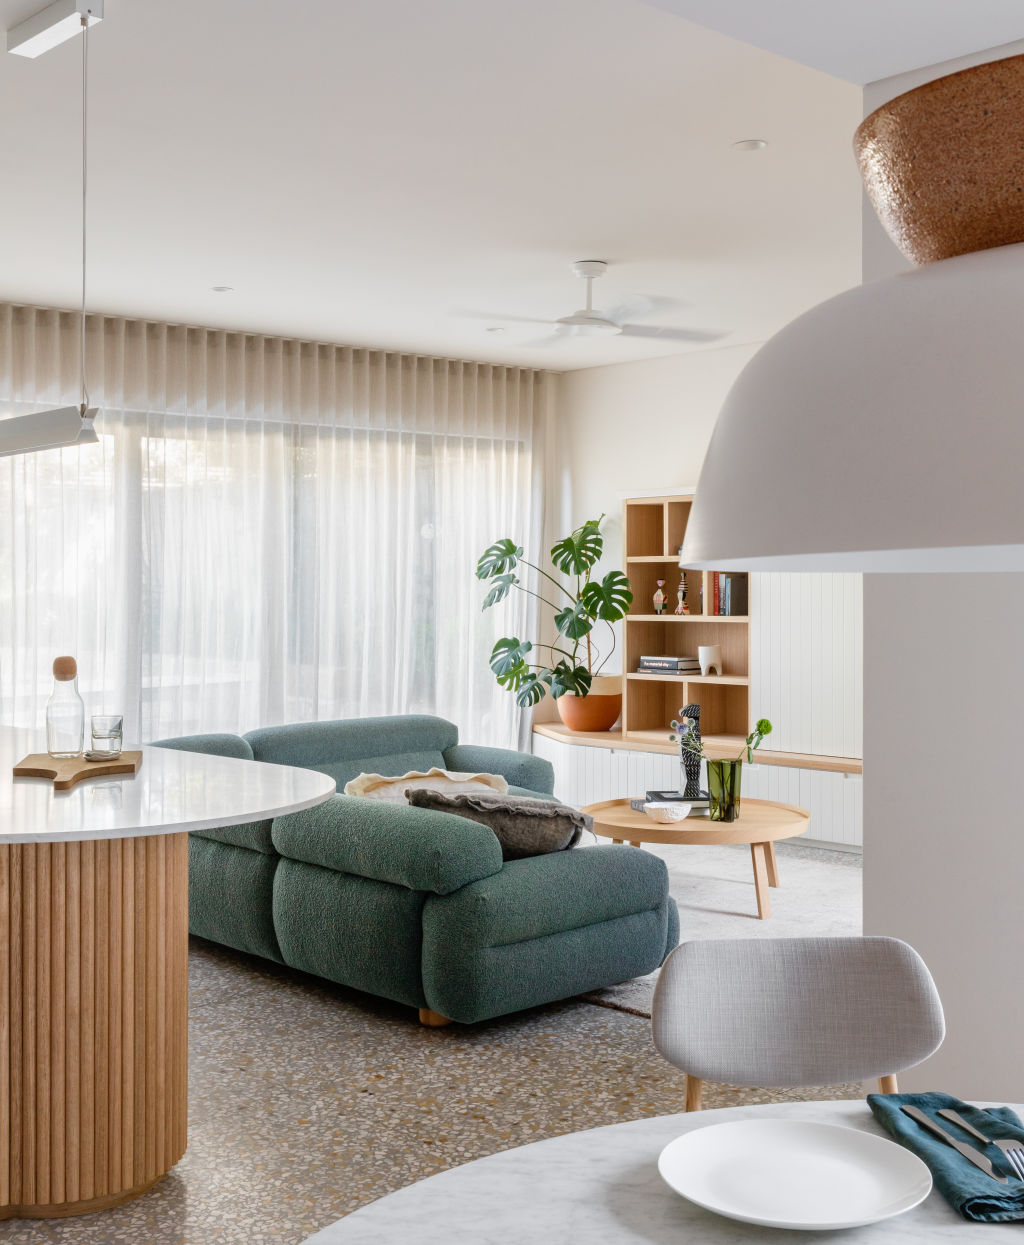 Timber brings a warmth to the home's palette. Photo: Katherine Lu